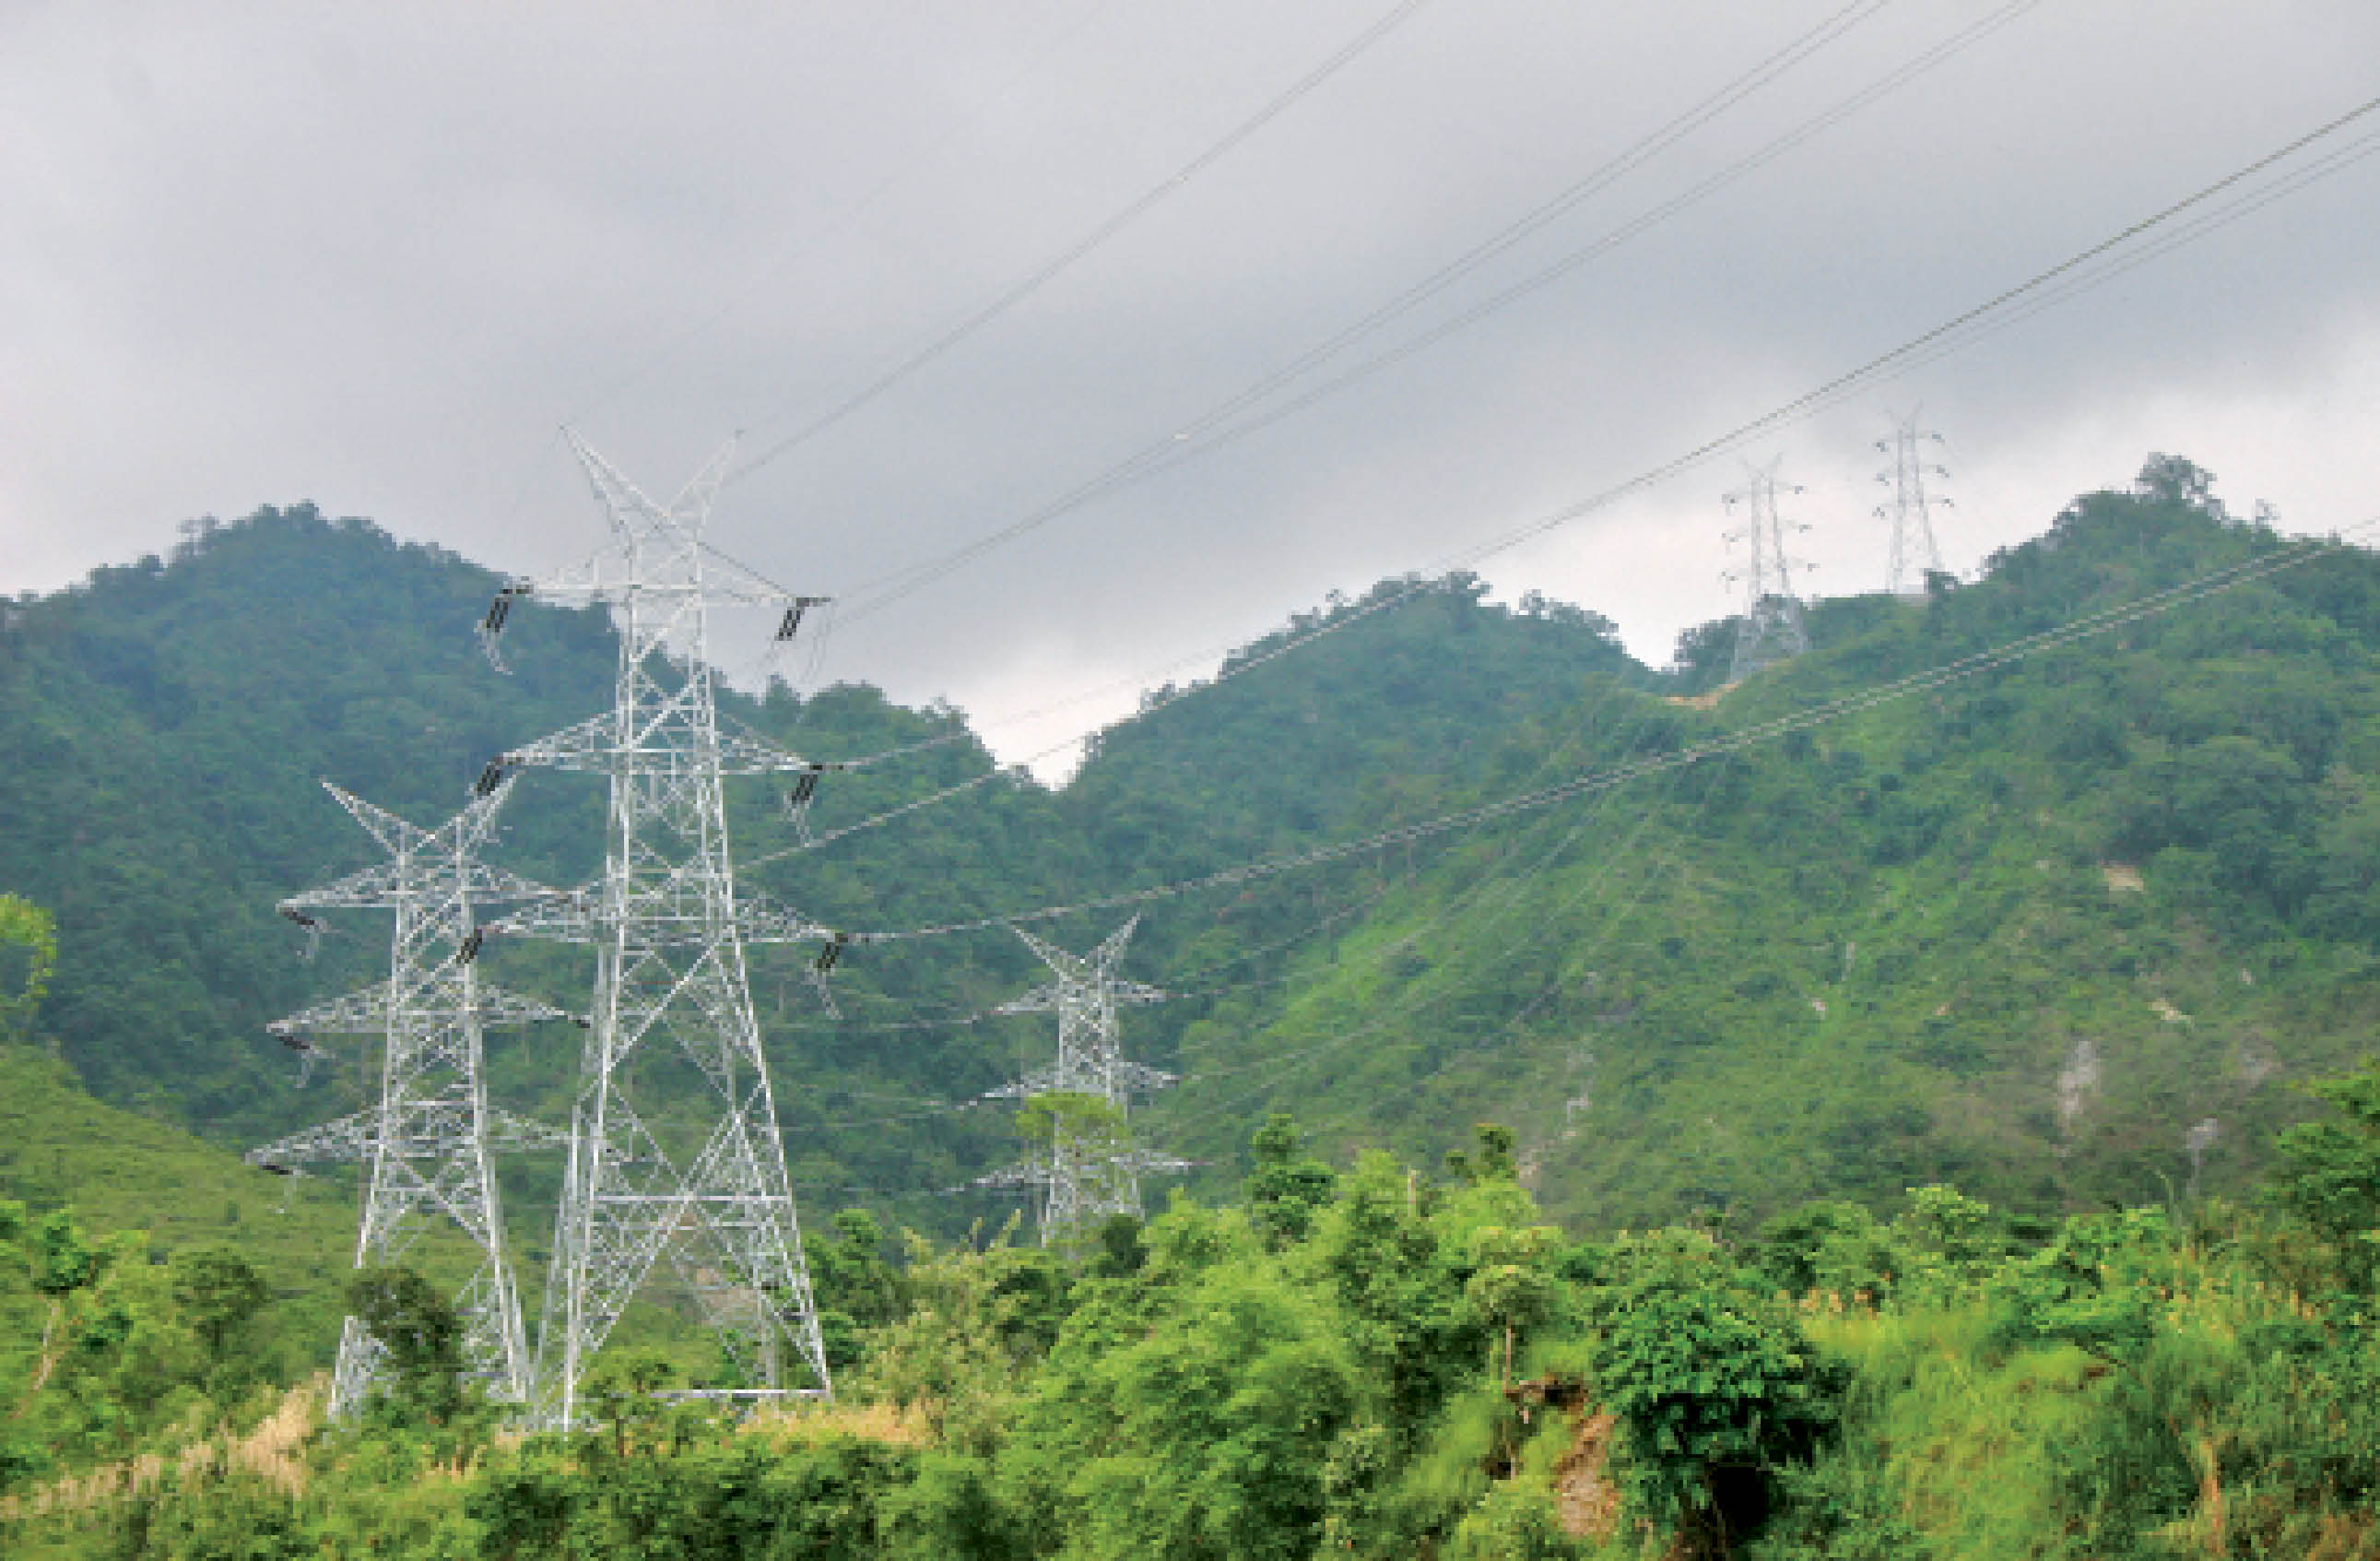 Sustainable Development: The Powergrid Approach